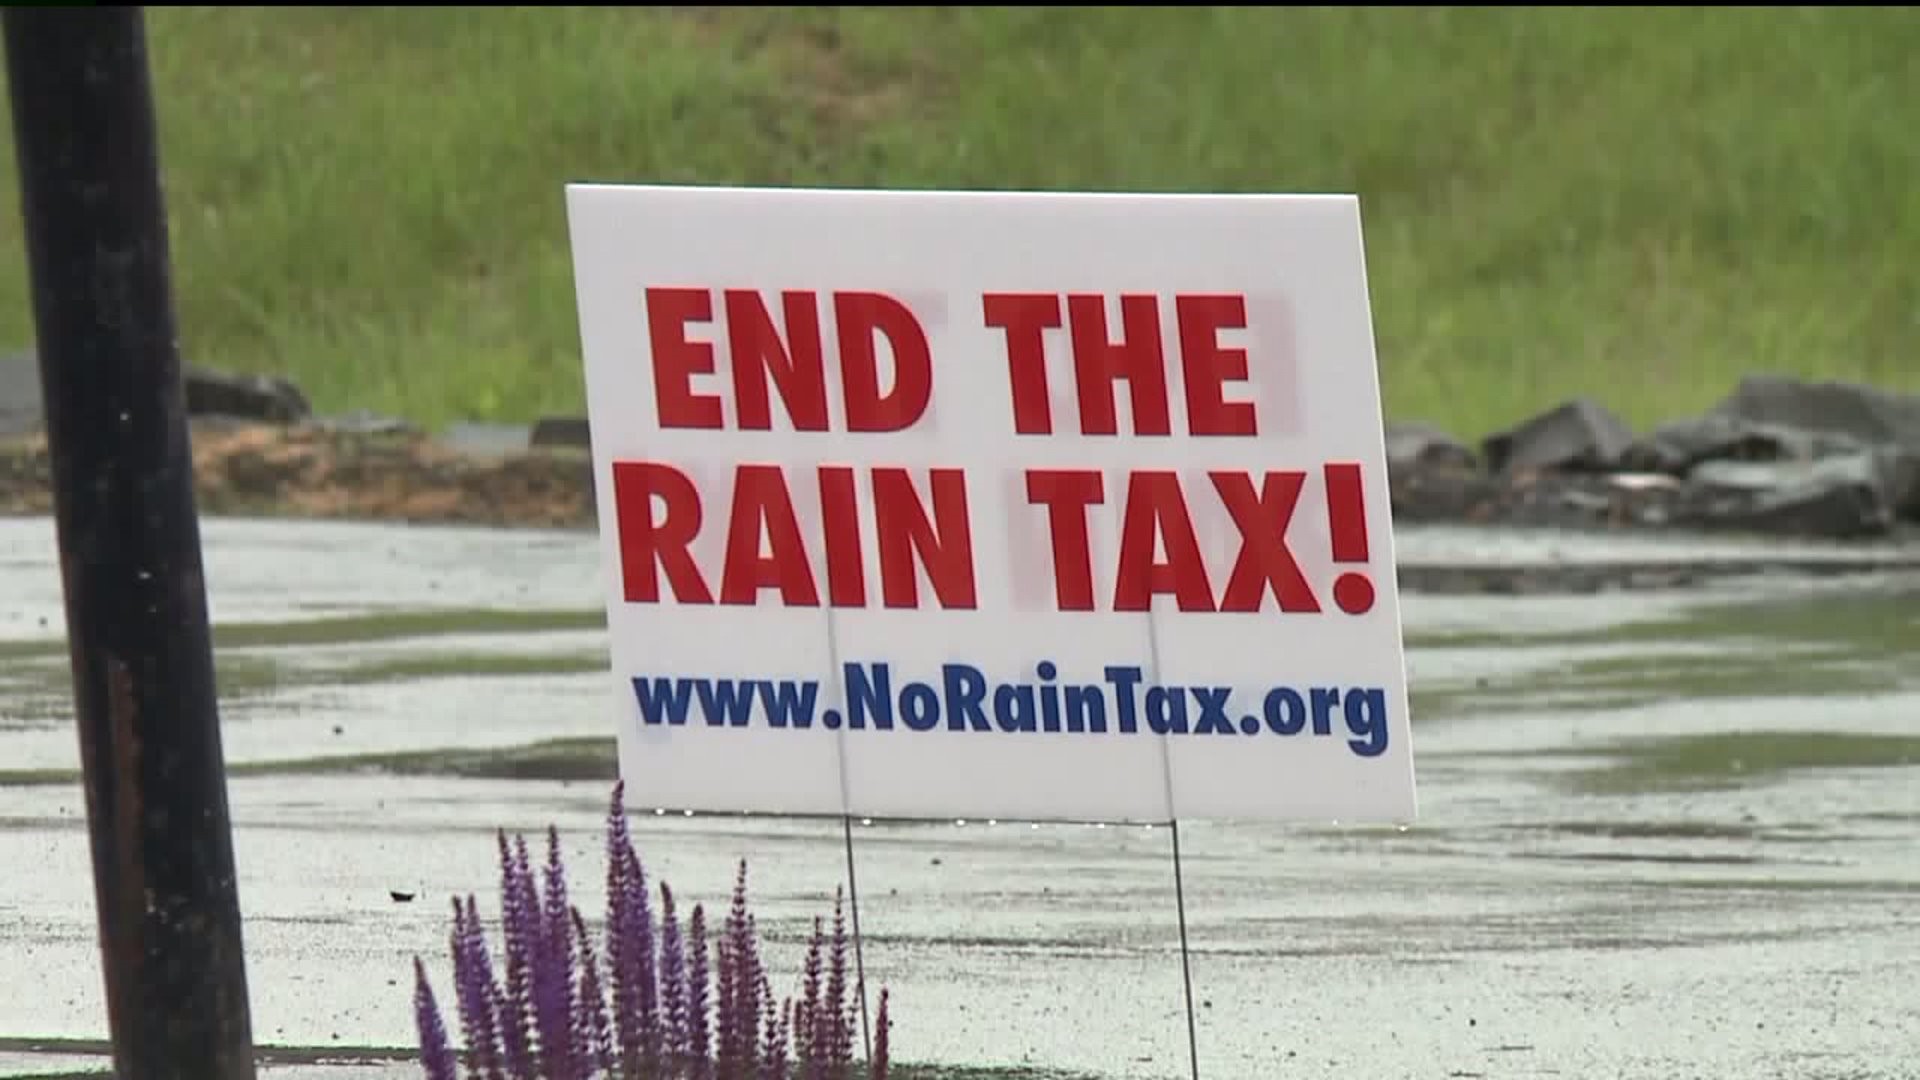 'End the Rain Tax' Group Fighting Stormwater Fee